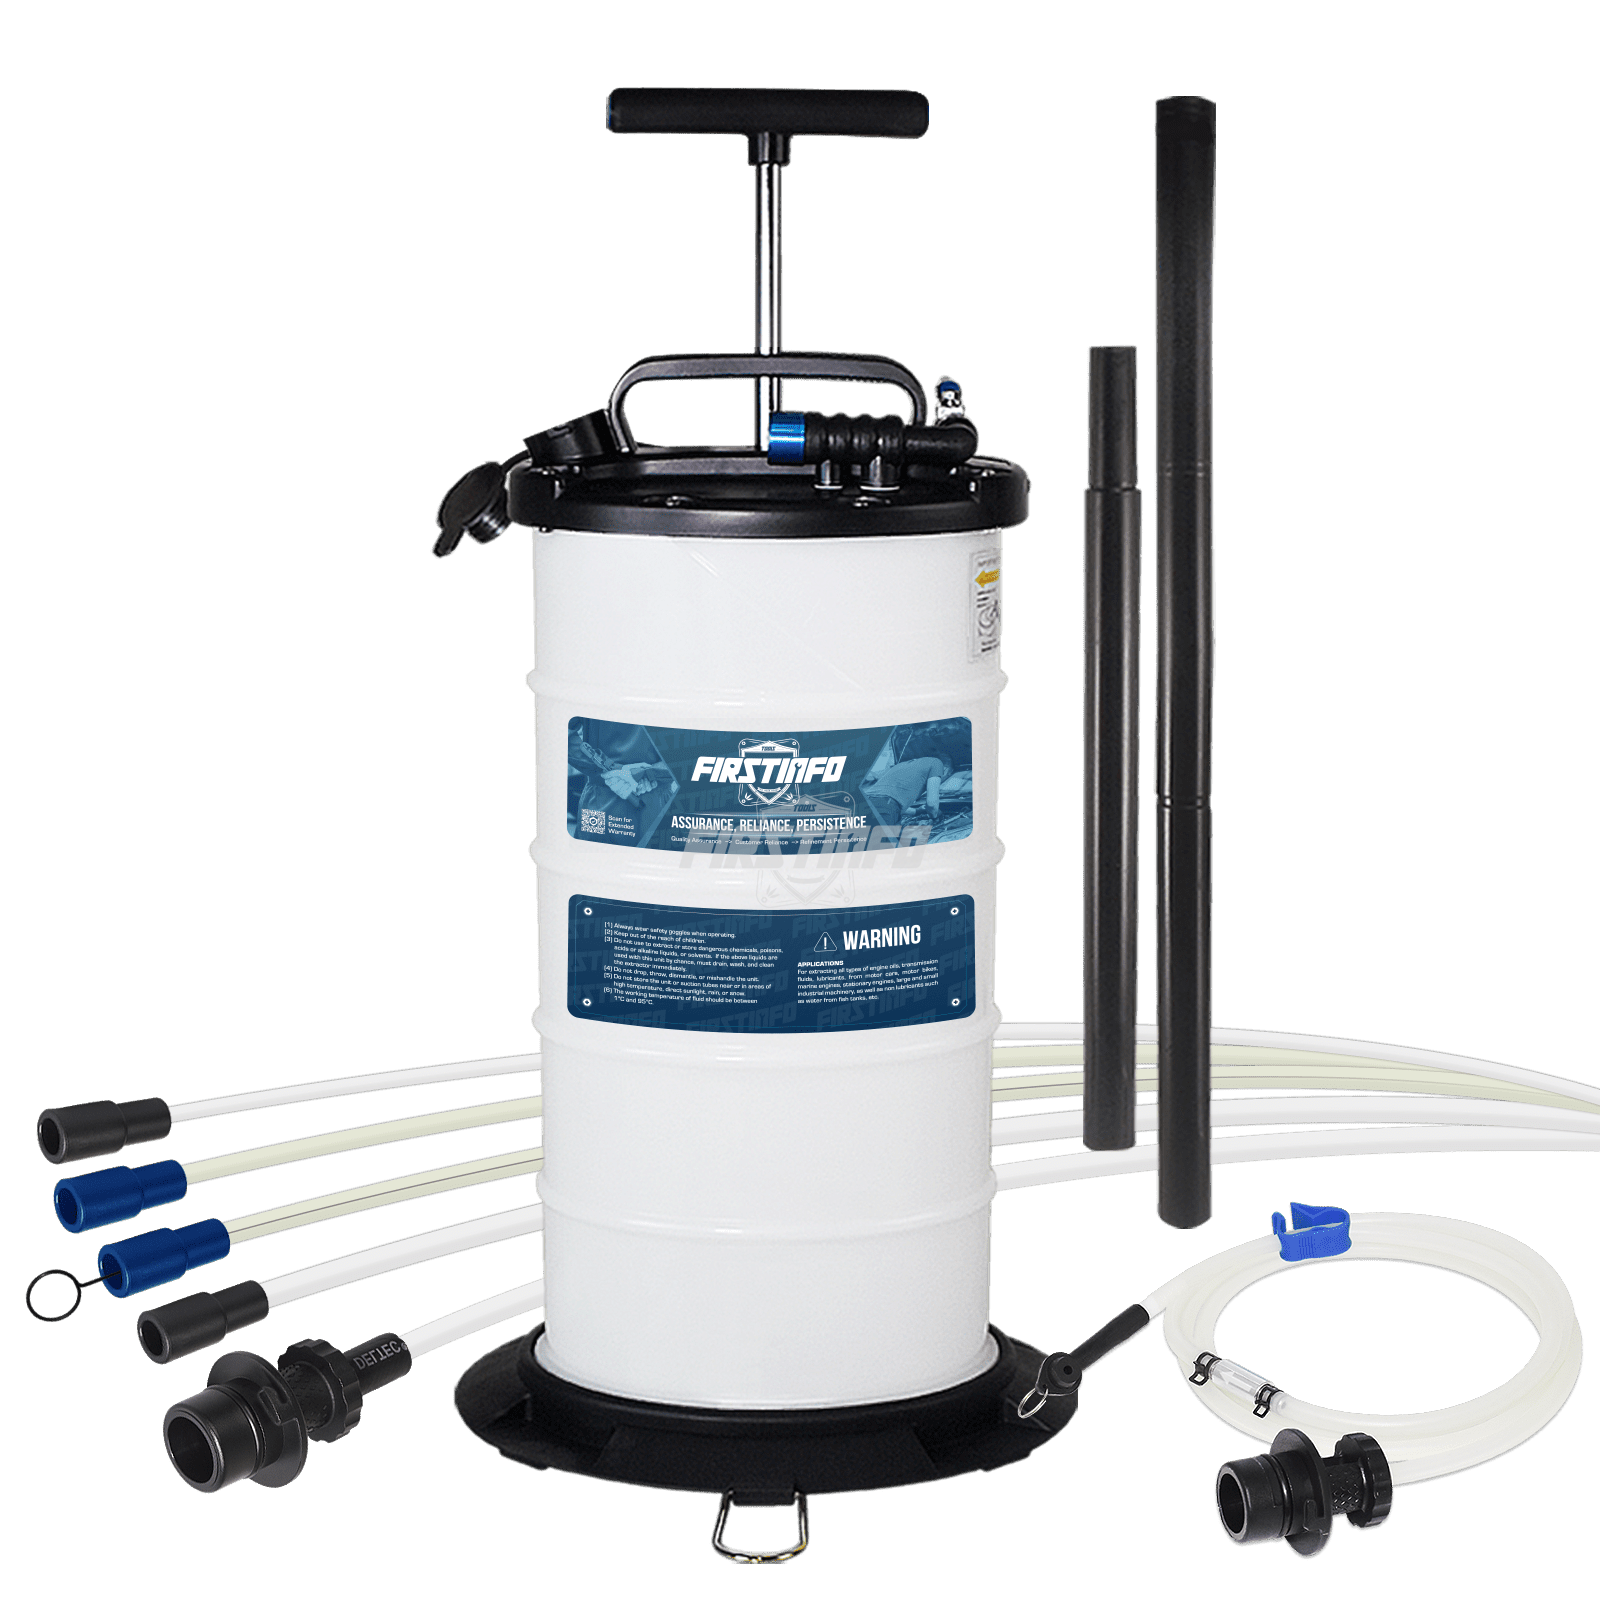 A1105 9.5L Pneumatic / Manual Oil & Fluid Extractor with Brake Bleeder Hose